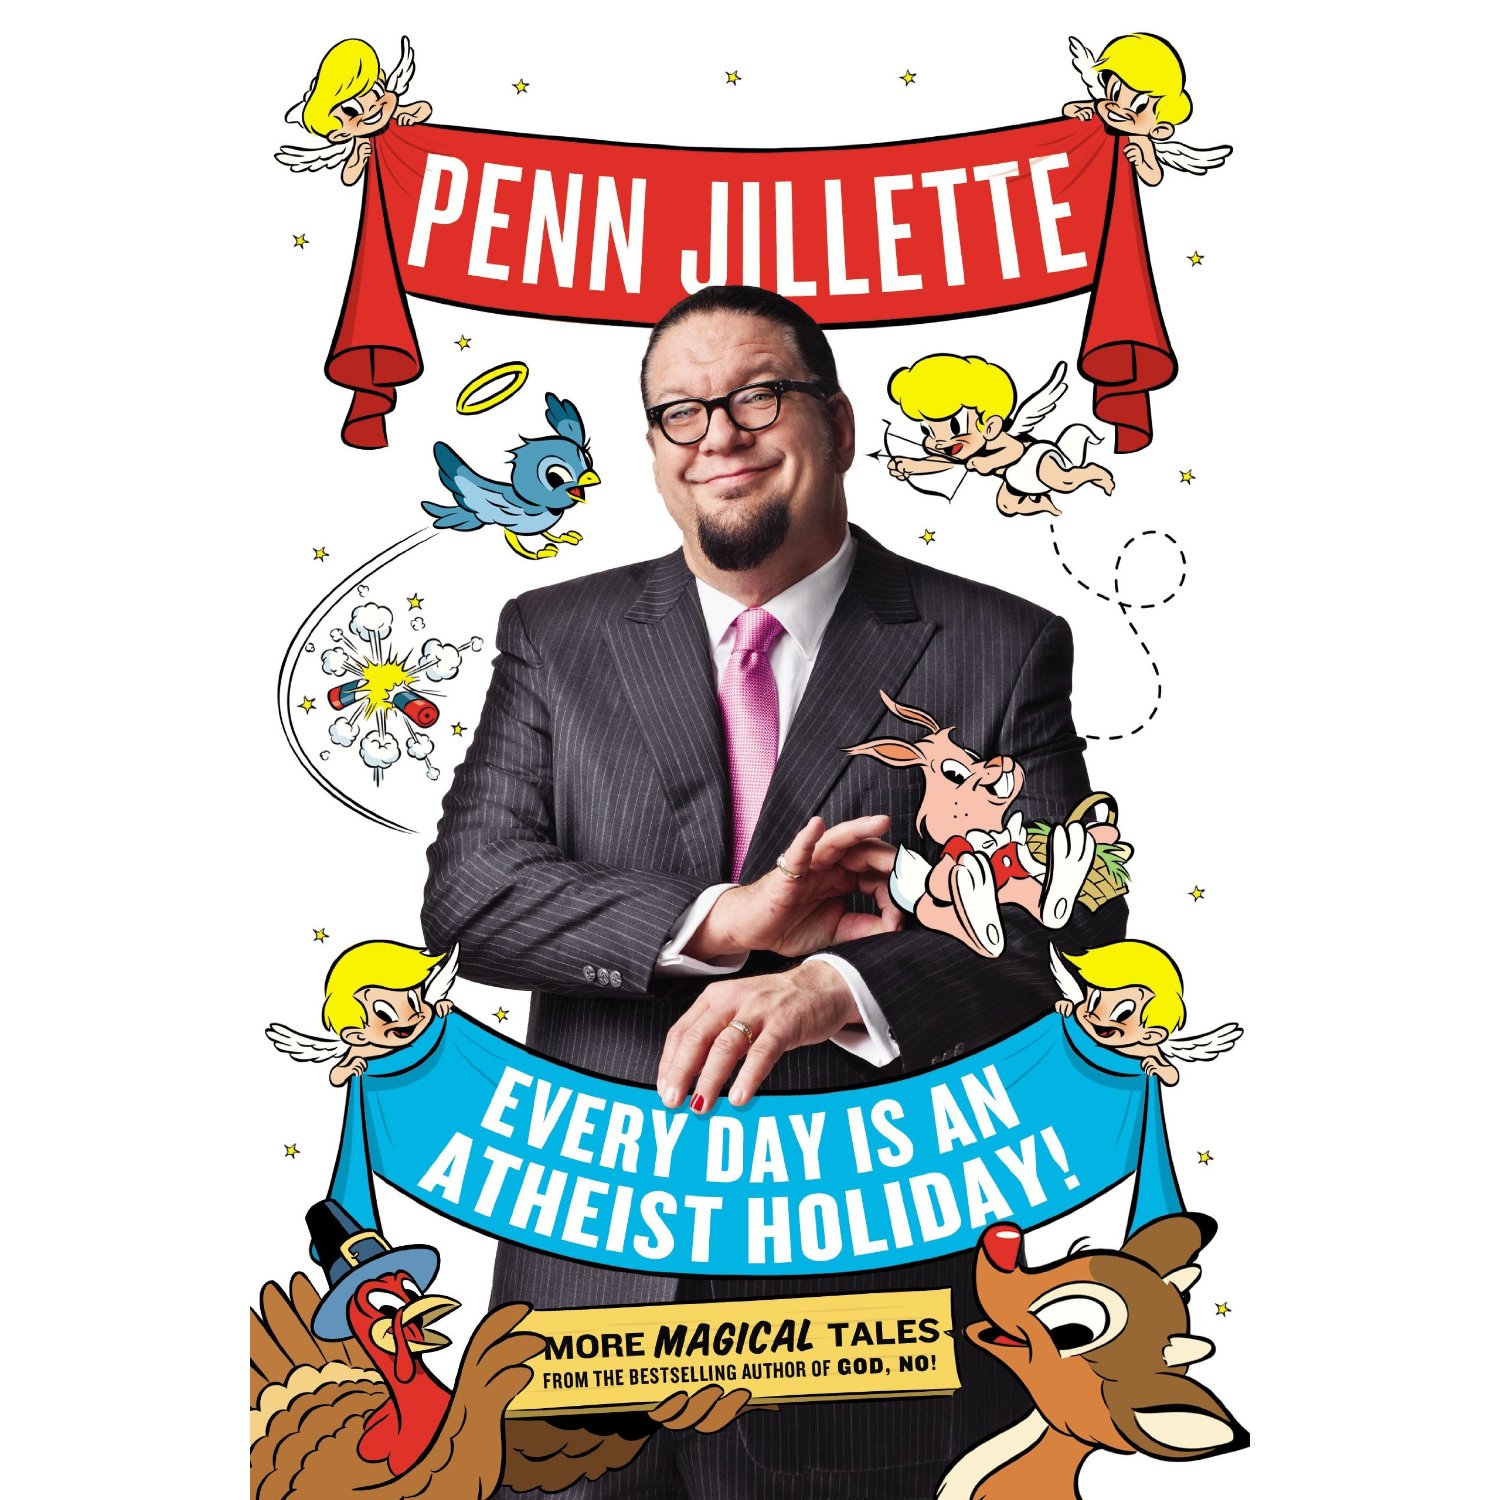 Penn Jillette’s New Book Is Now Available